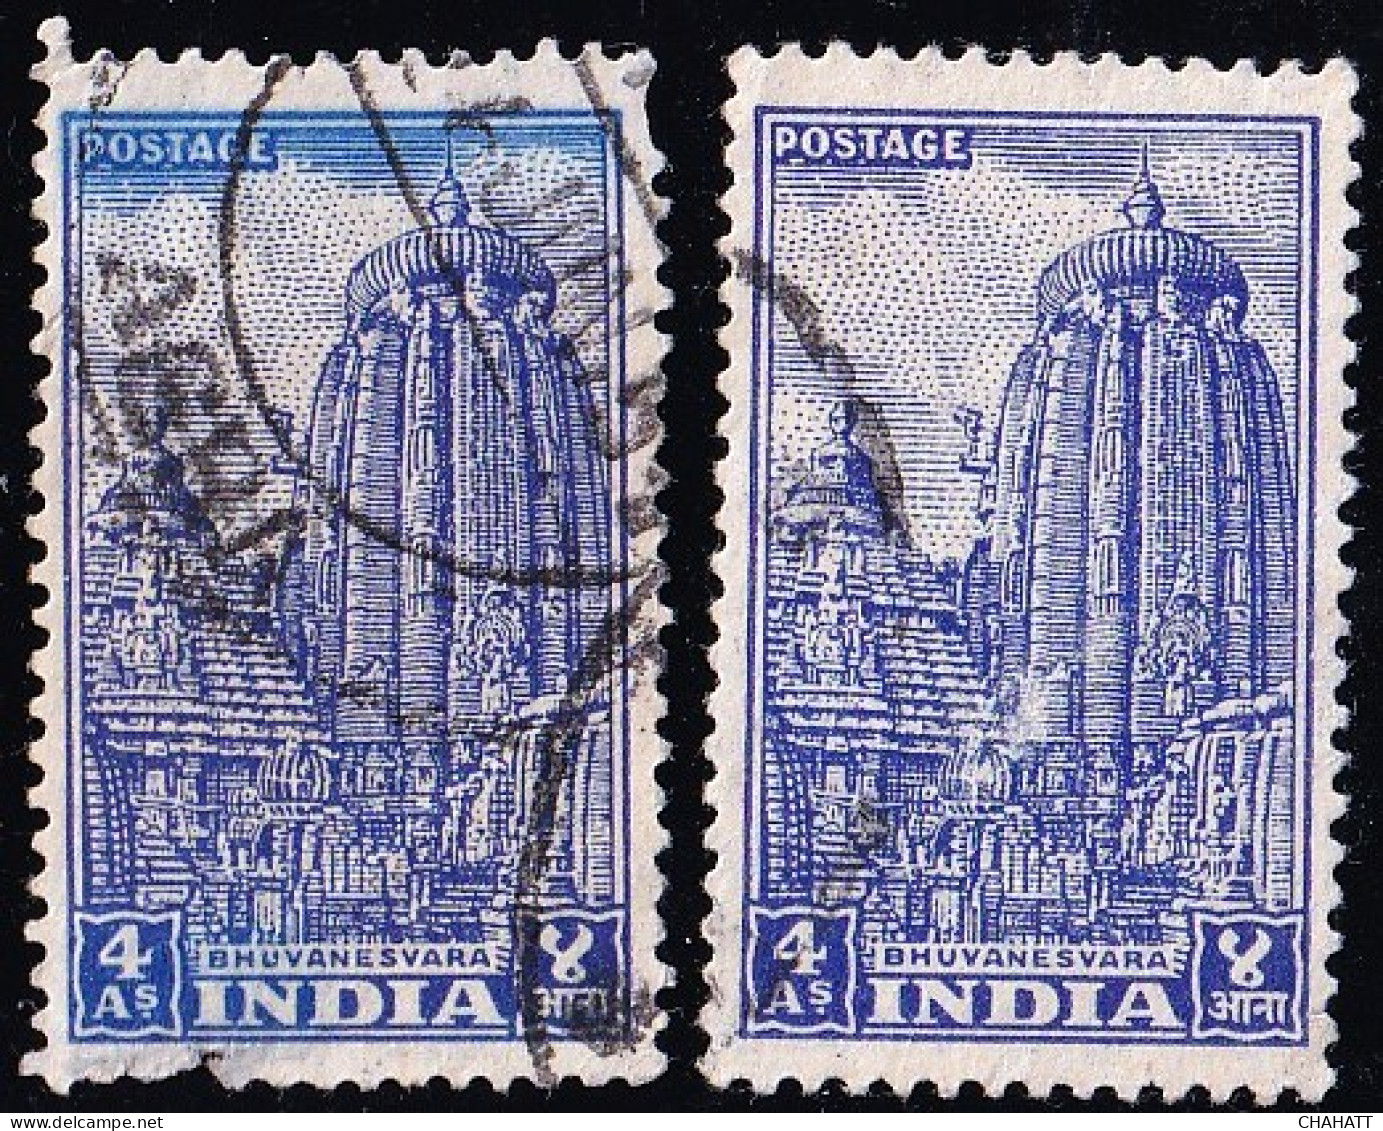 INDIA-1949-PRE DECIMAL- 4 ANNAS- ARCHAEOLOGICAL MONUMENTS SERIES- LINGARAJ TEMPLE- COLOR VARIETY-FU- H2-23 - Used Stamps